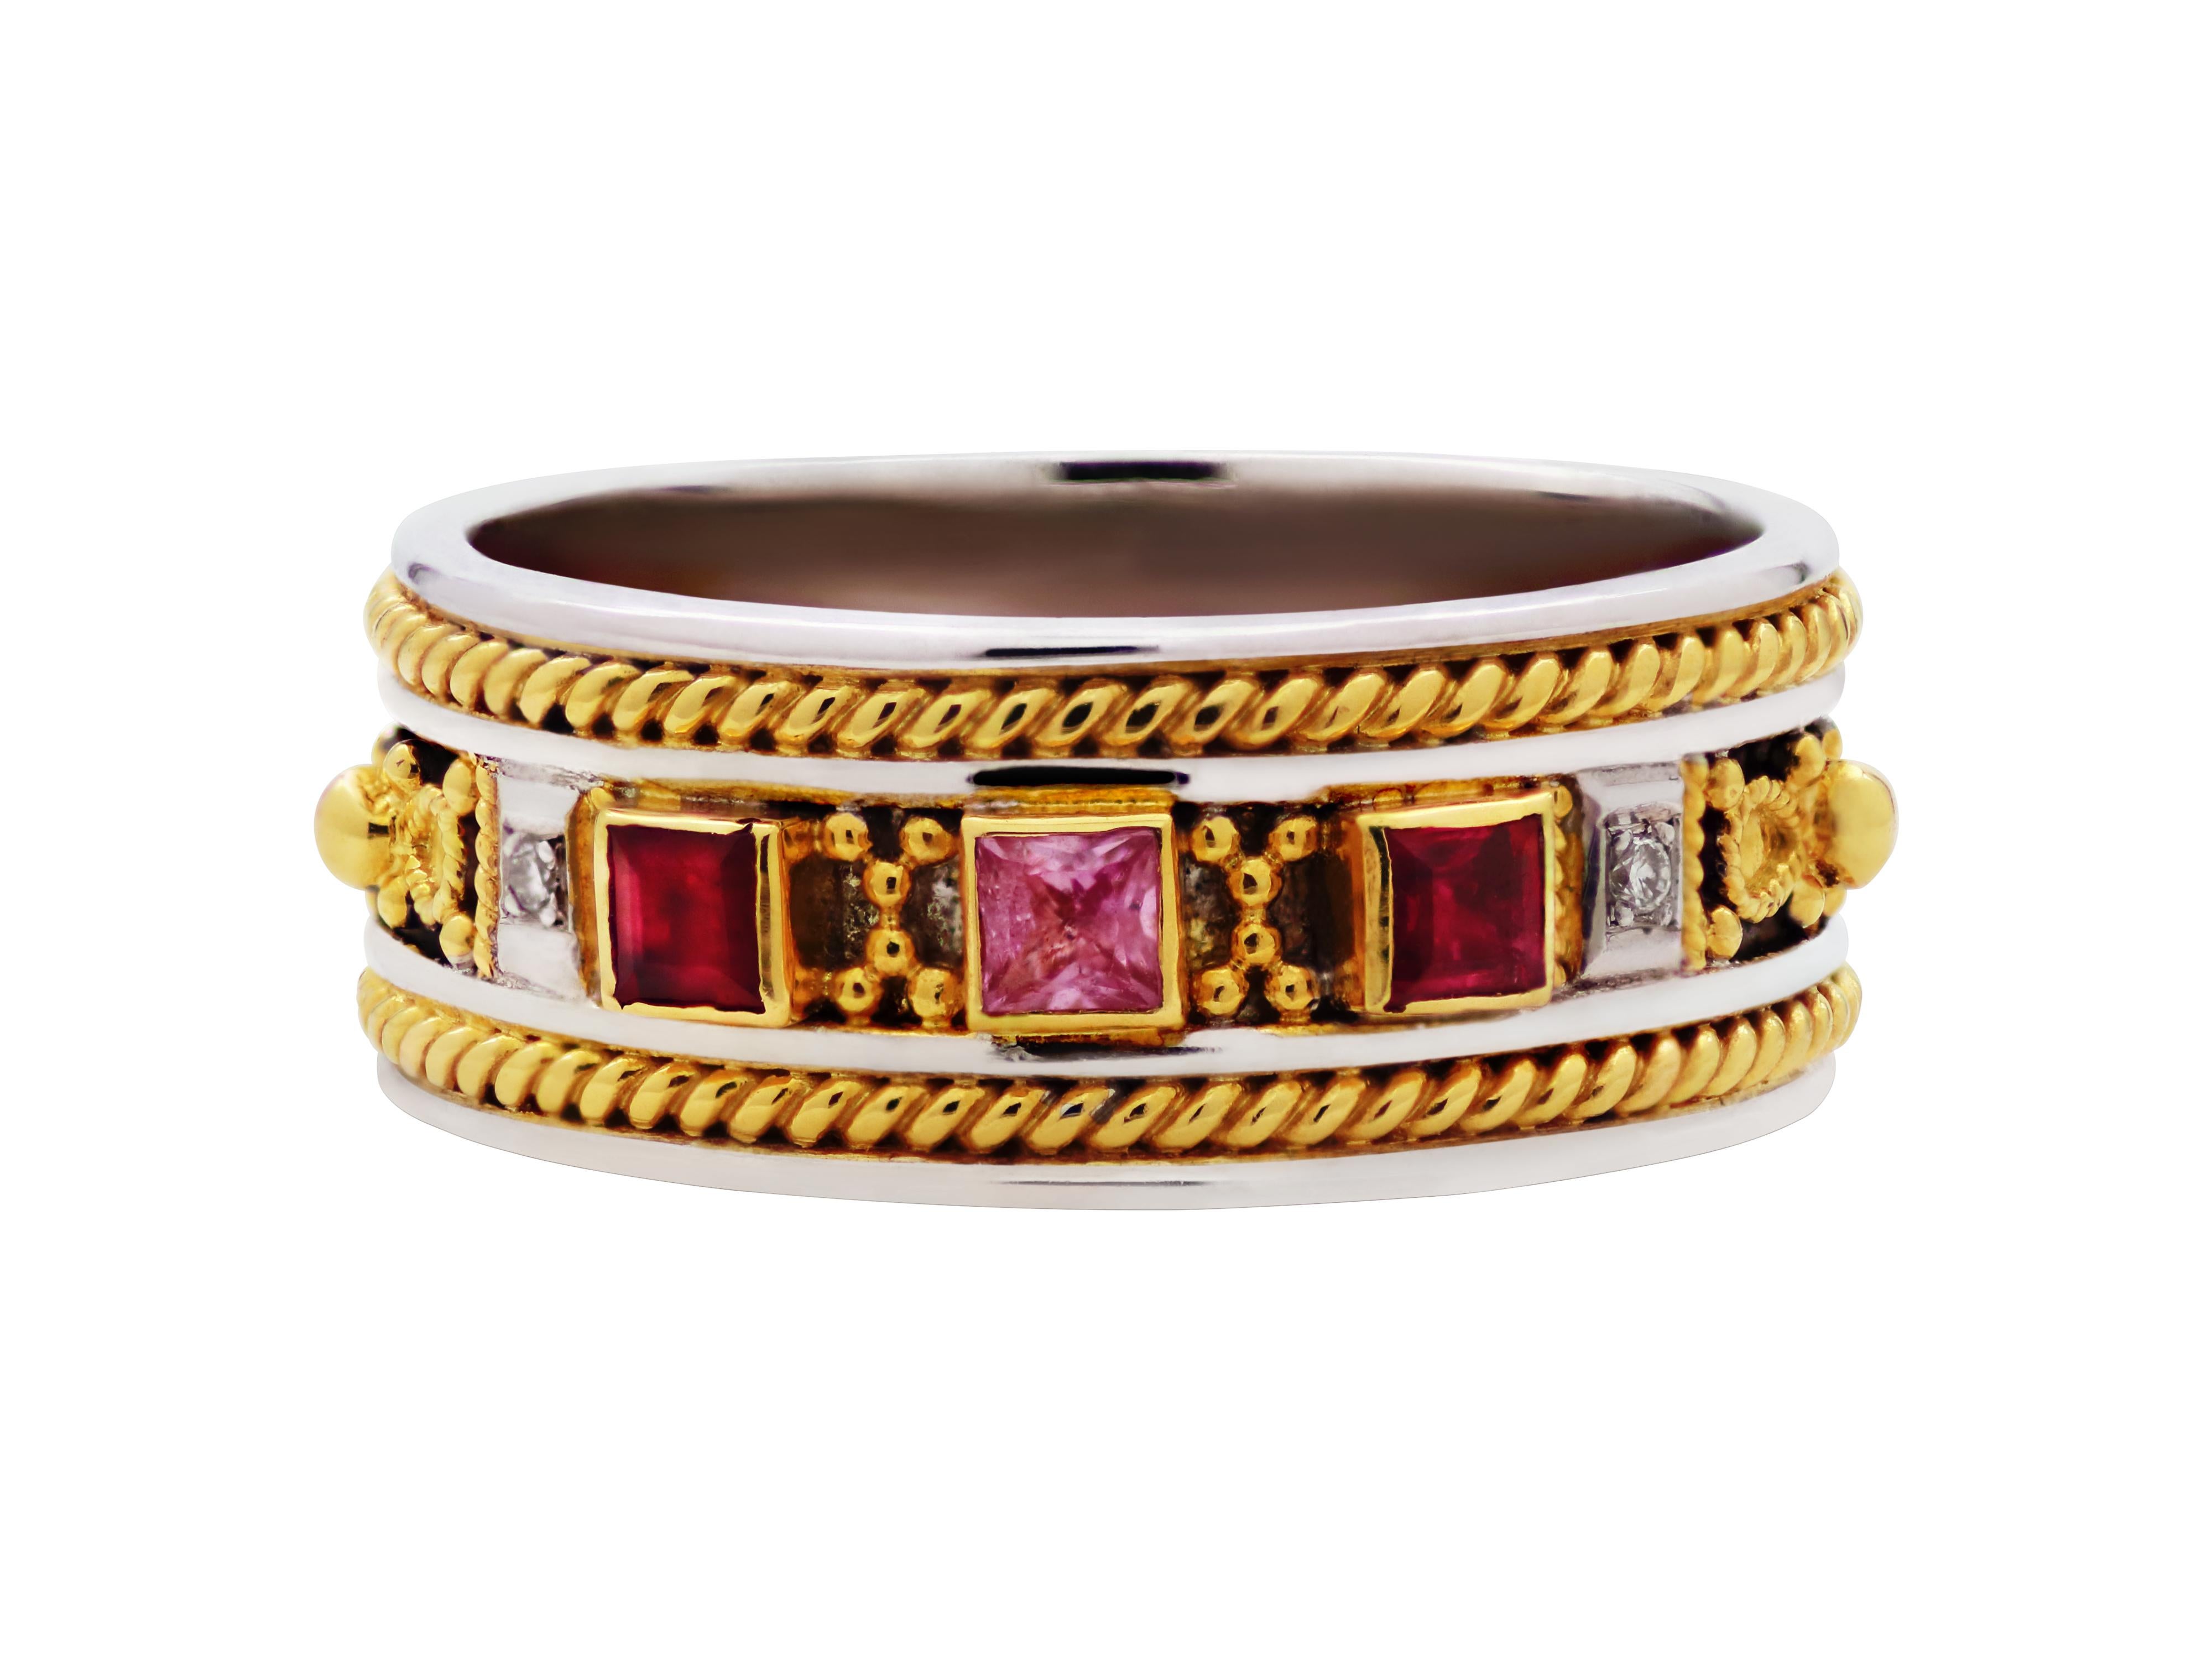 Byzantine ring in a beautiful combination with 18k gold and 925 silver. Pink sapphire, rubies and white diamonds give it a lot of character in a very daily size. Our famous handmade filigrees and granulation work mark the Byzantine era.